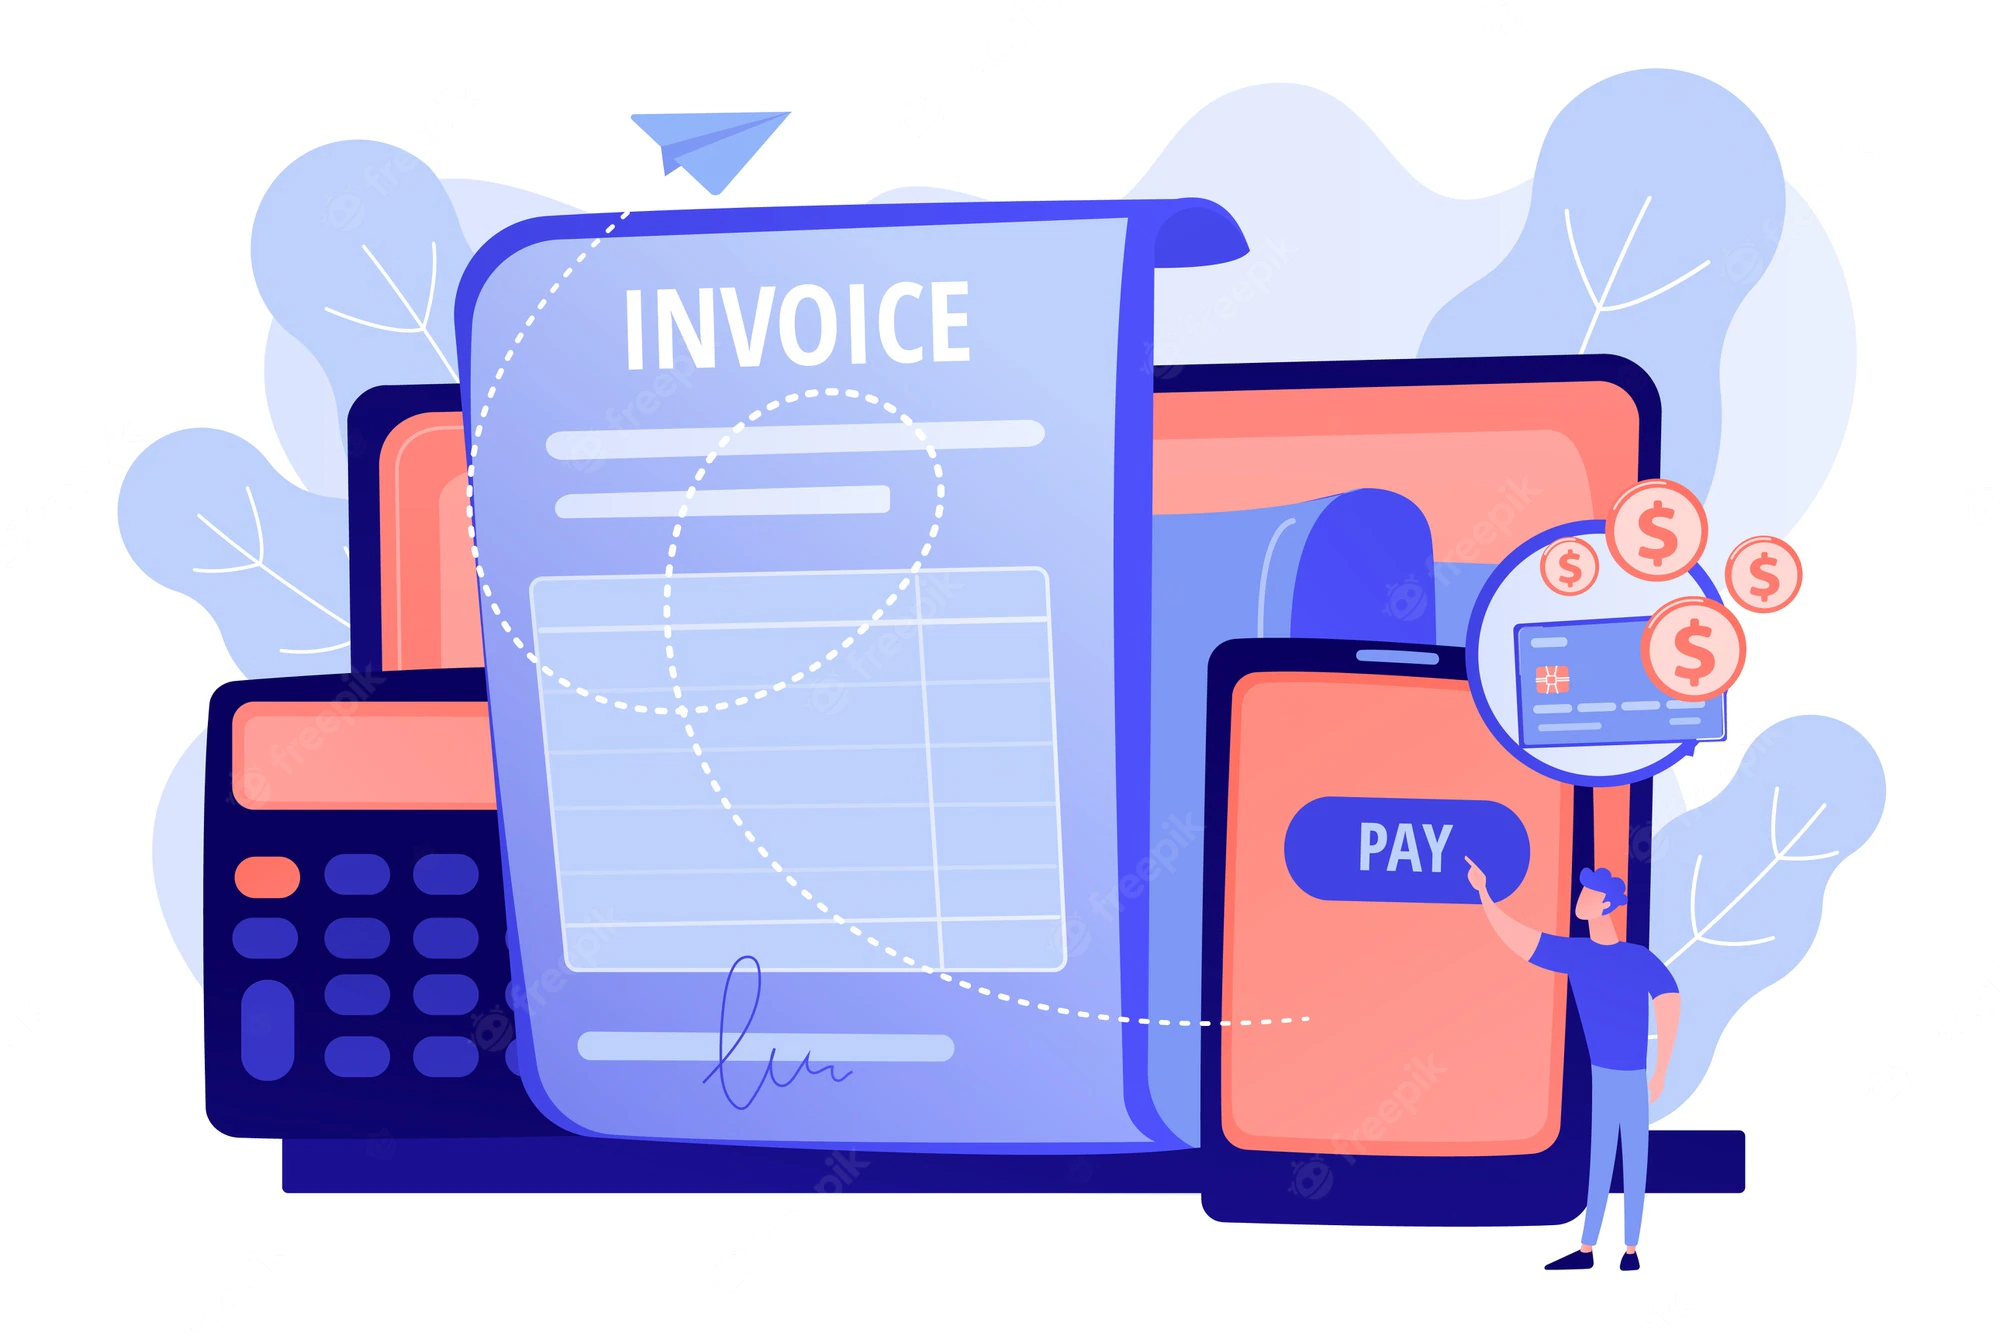 What is Sales Invoice and why is it important in CRM?